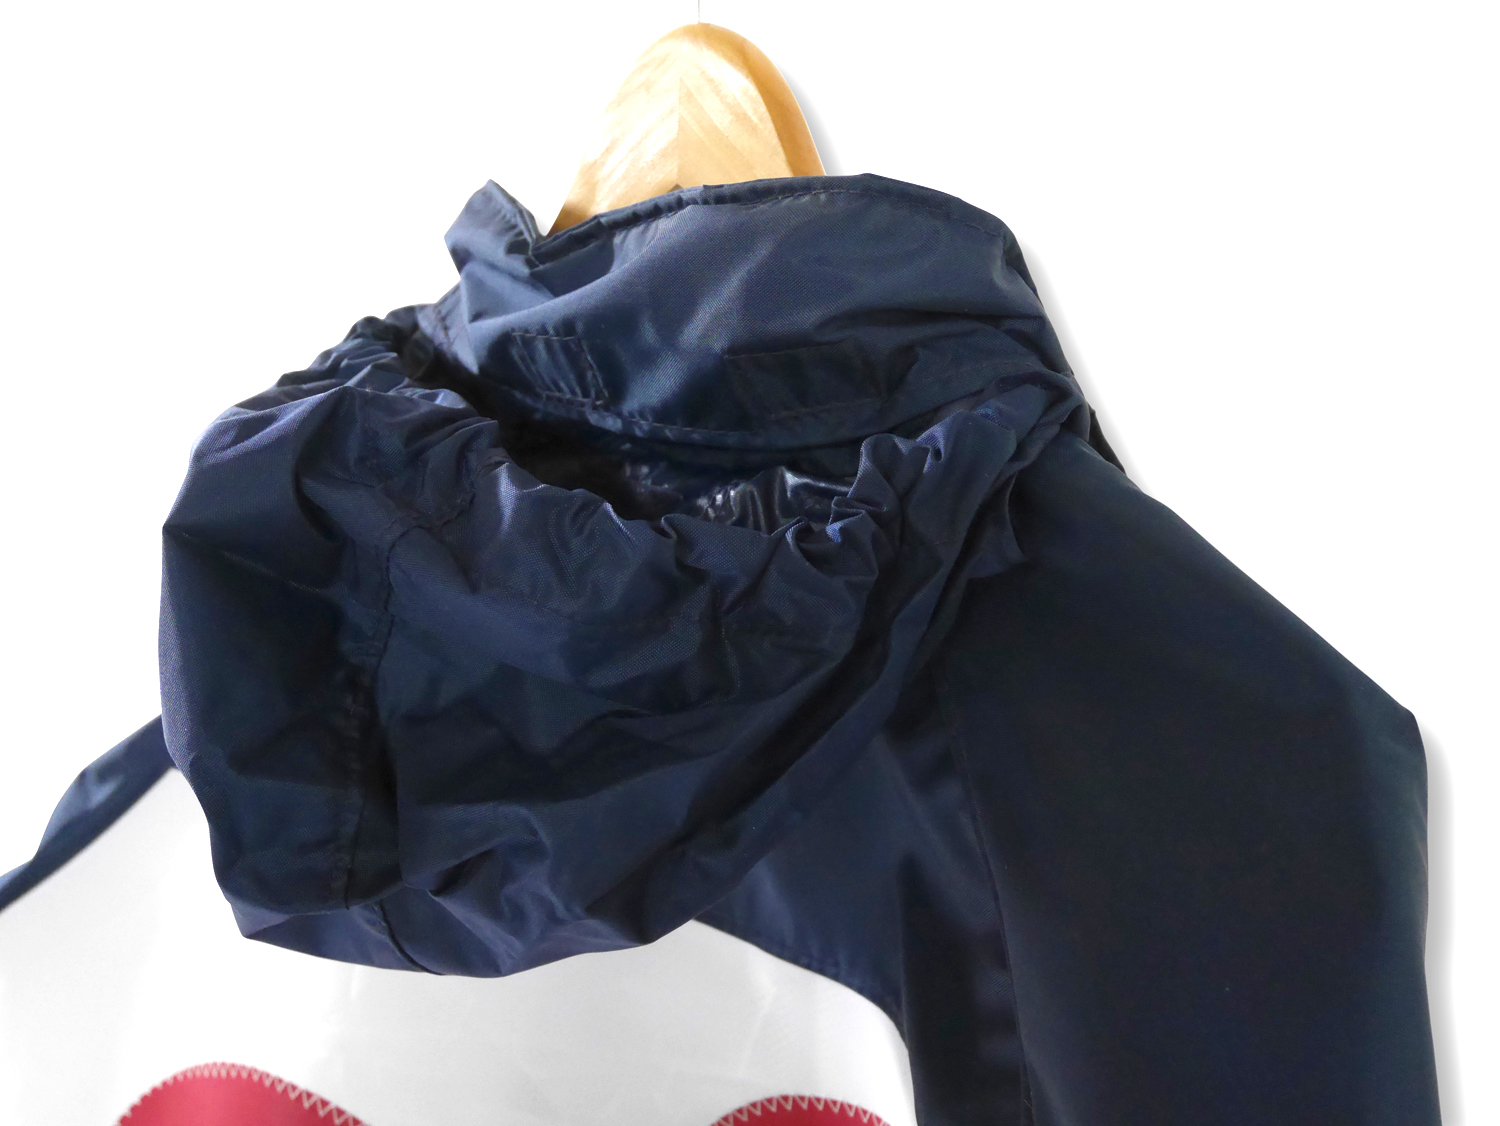 Fairweather Jacket with Sail Number - Resails